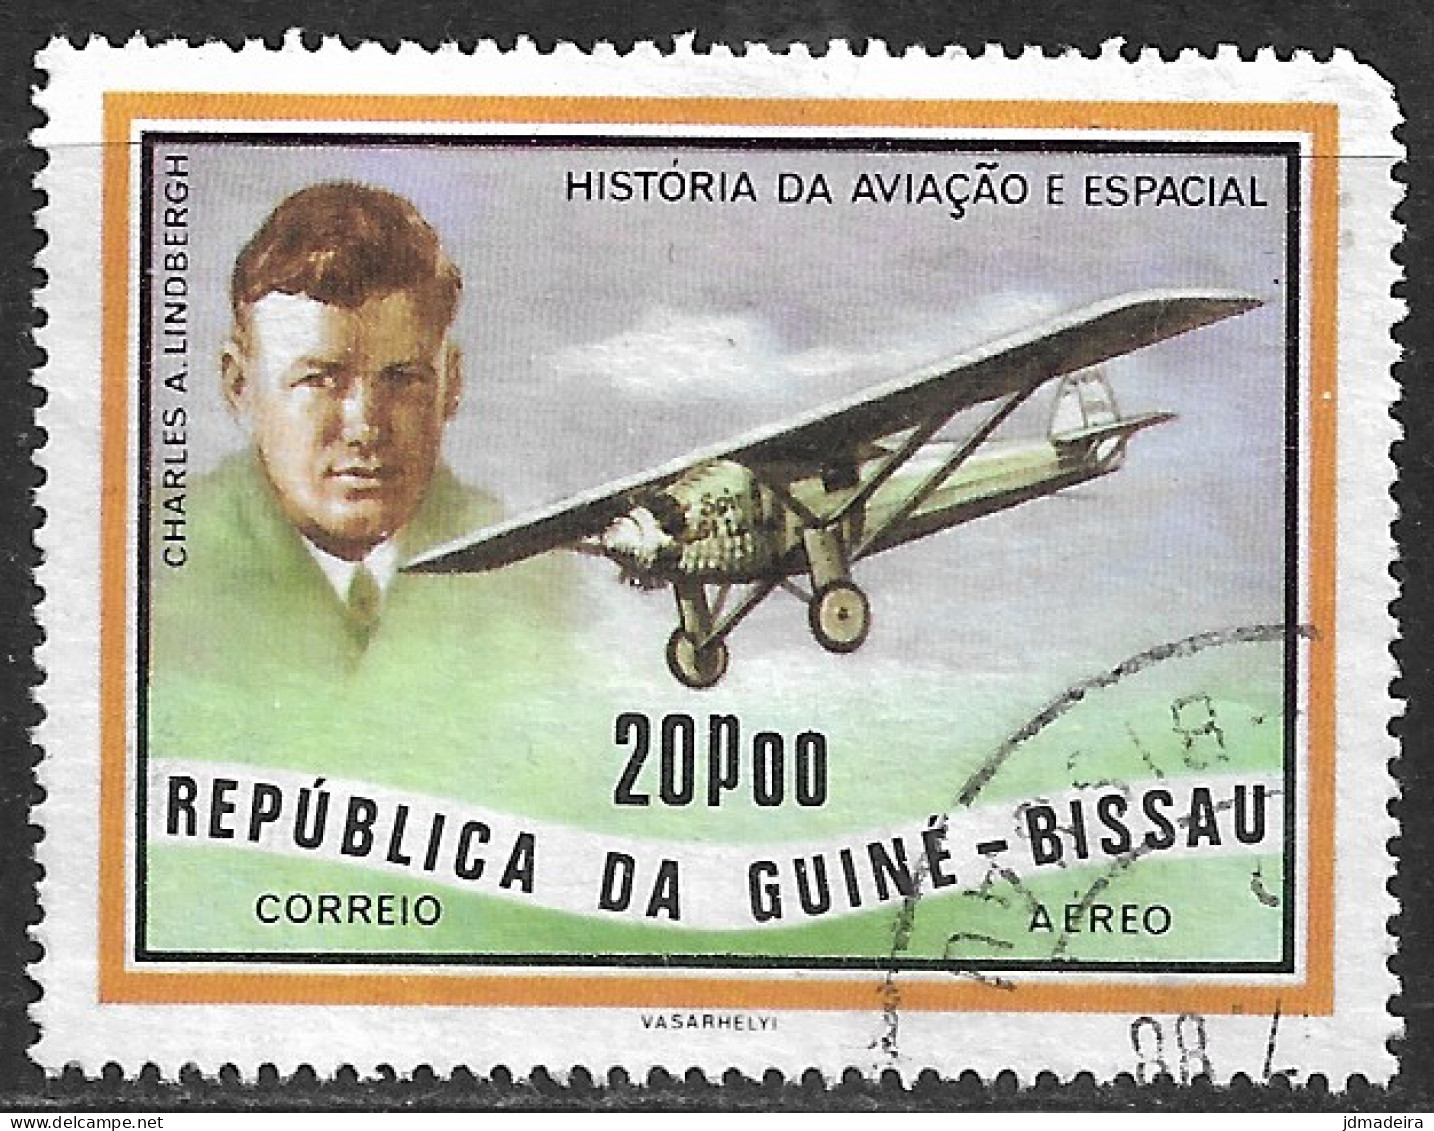 GUINE BISSAU – 1978 Aviation And Space History 20P00 Used Stamp - Guinea-Bissau